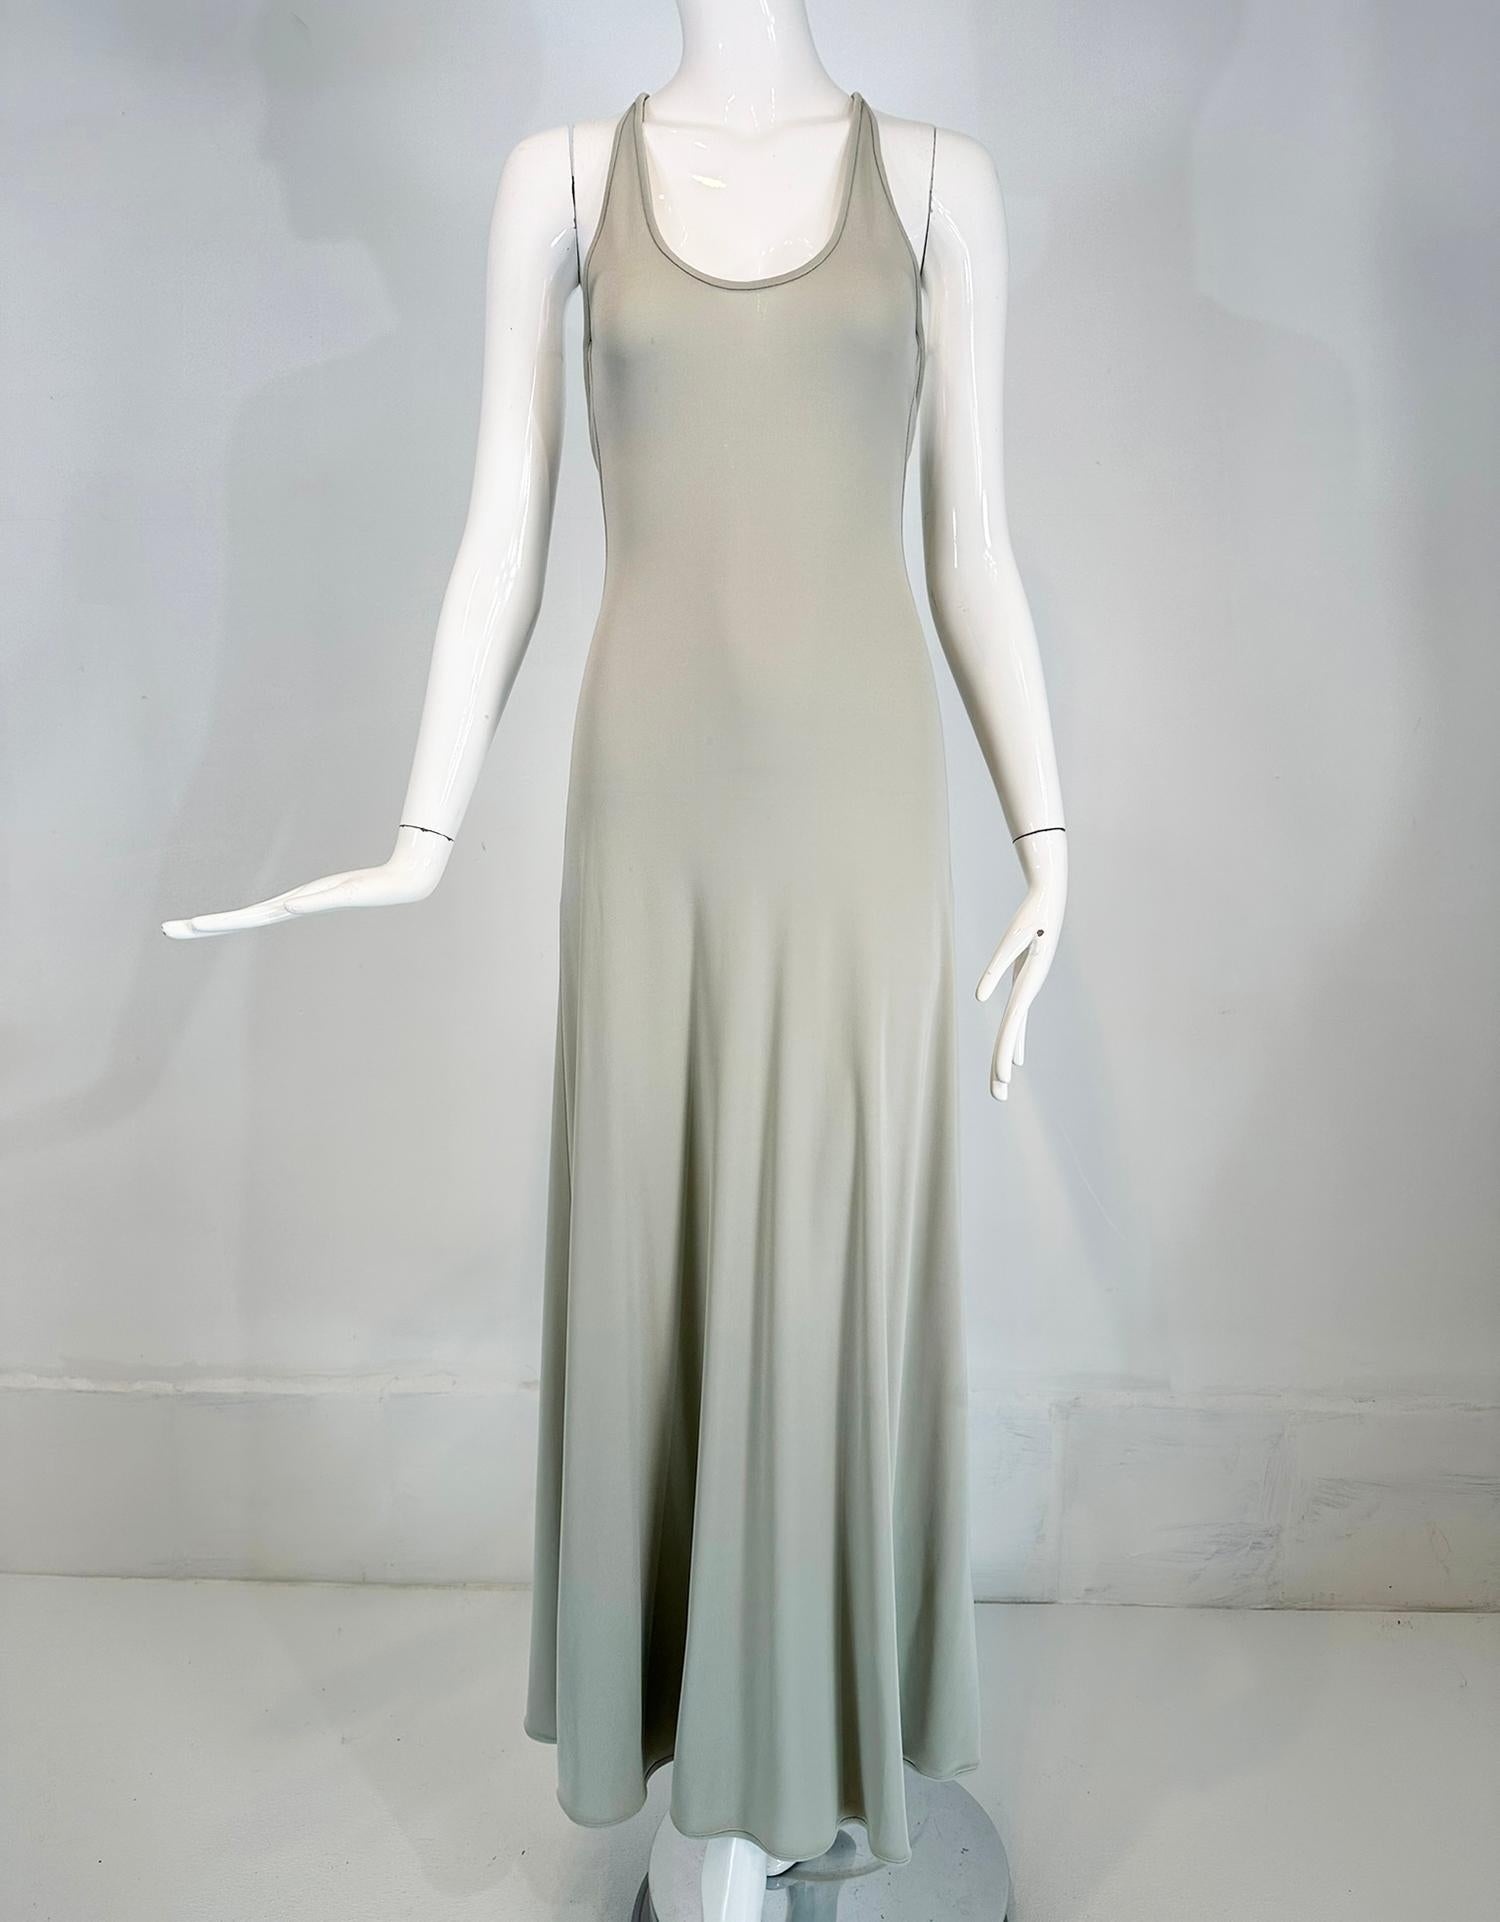 Giorgio Armani pale grey bias jersey, halter neck, open back maxi dress. Silky mid weight rayon blend jersey maxi dress pulls on. Halter neck, the back has skinny straps that knot at the center. The dress is fitted through the torso and flairs from